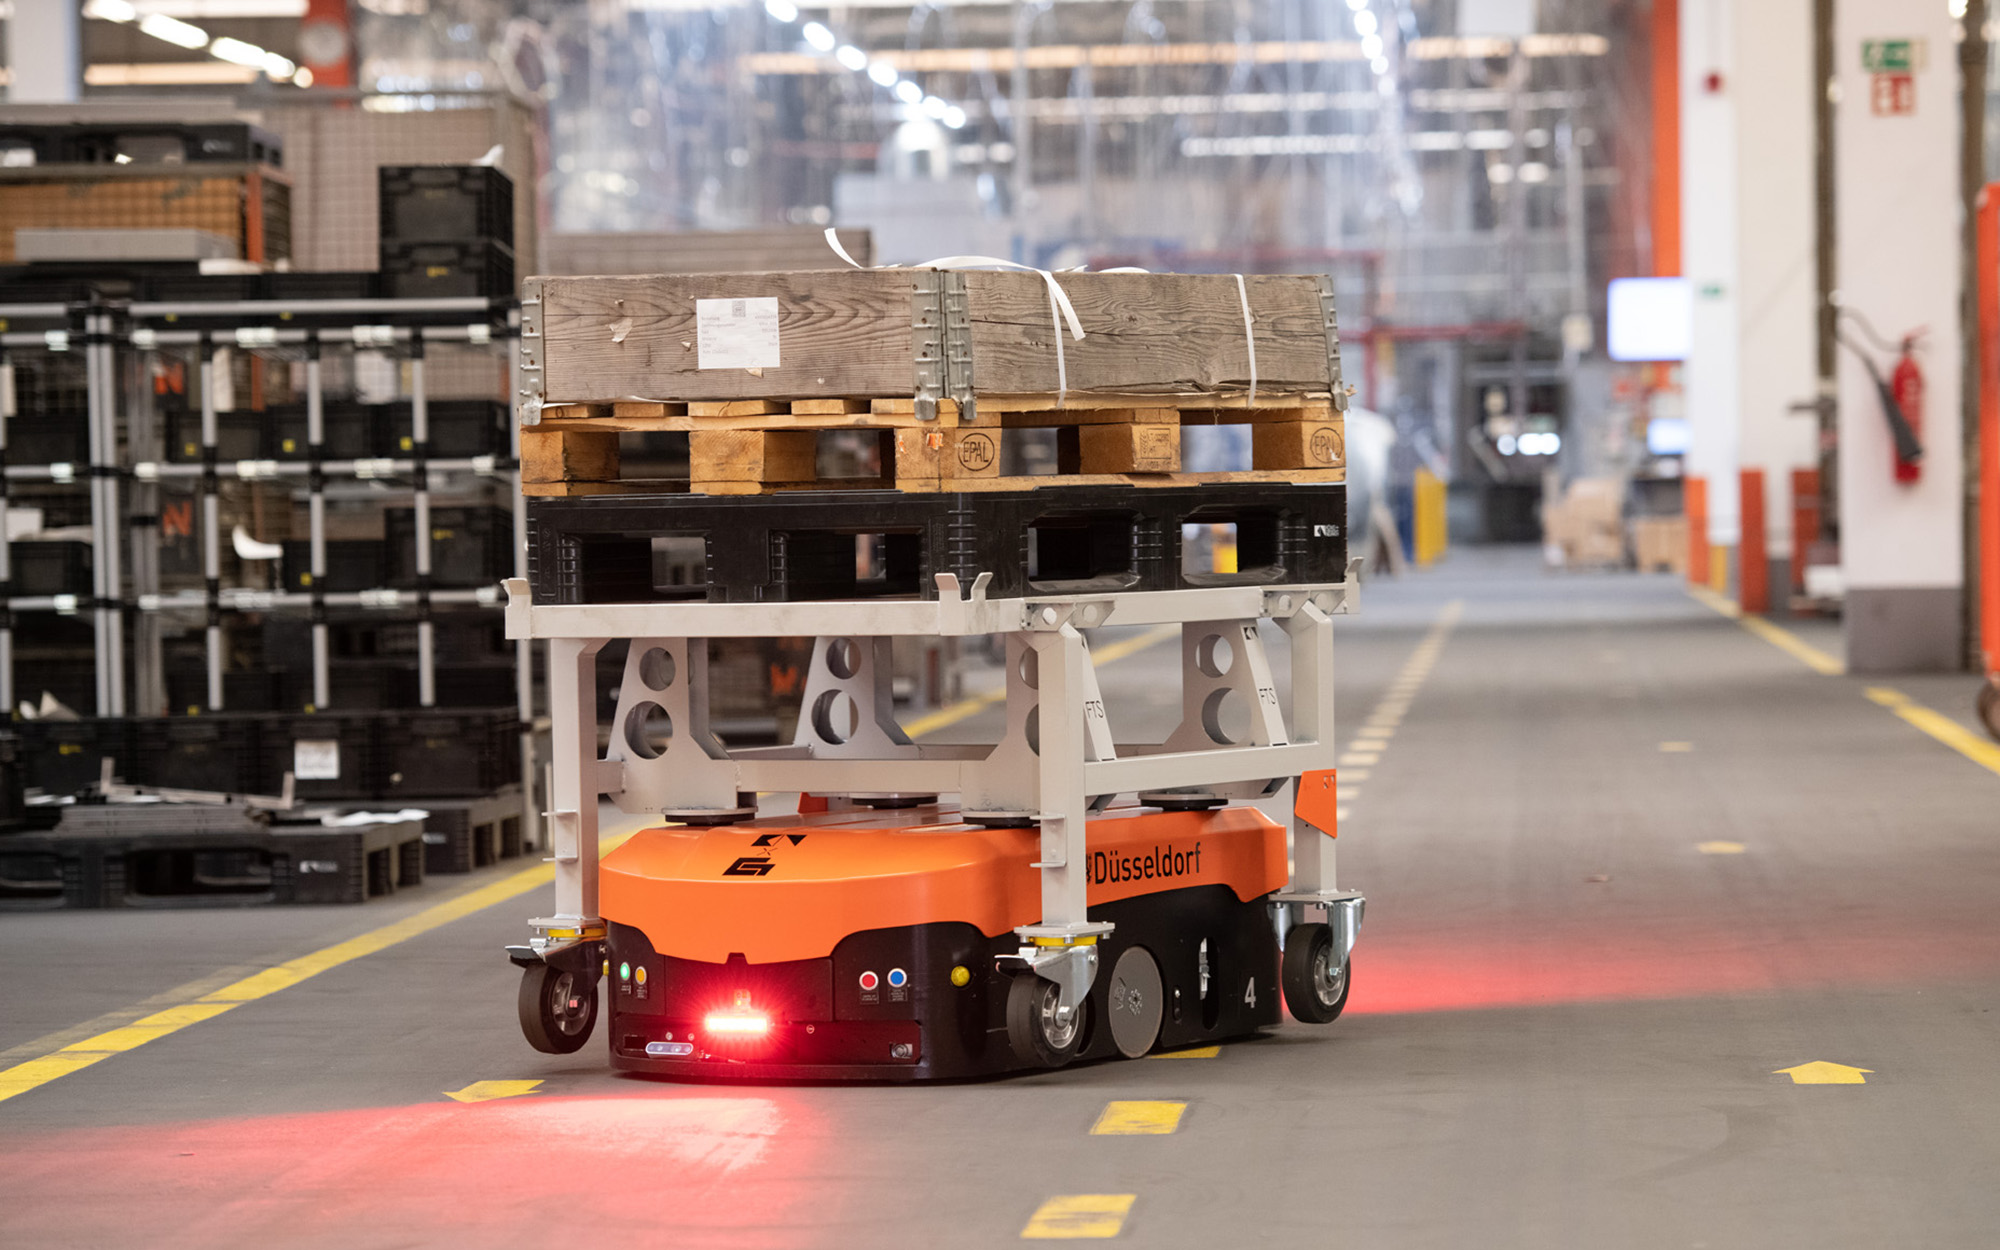 AGVs transport around 1,000 good carriers